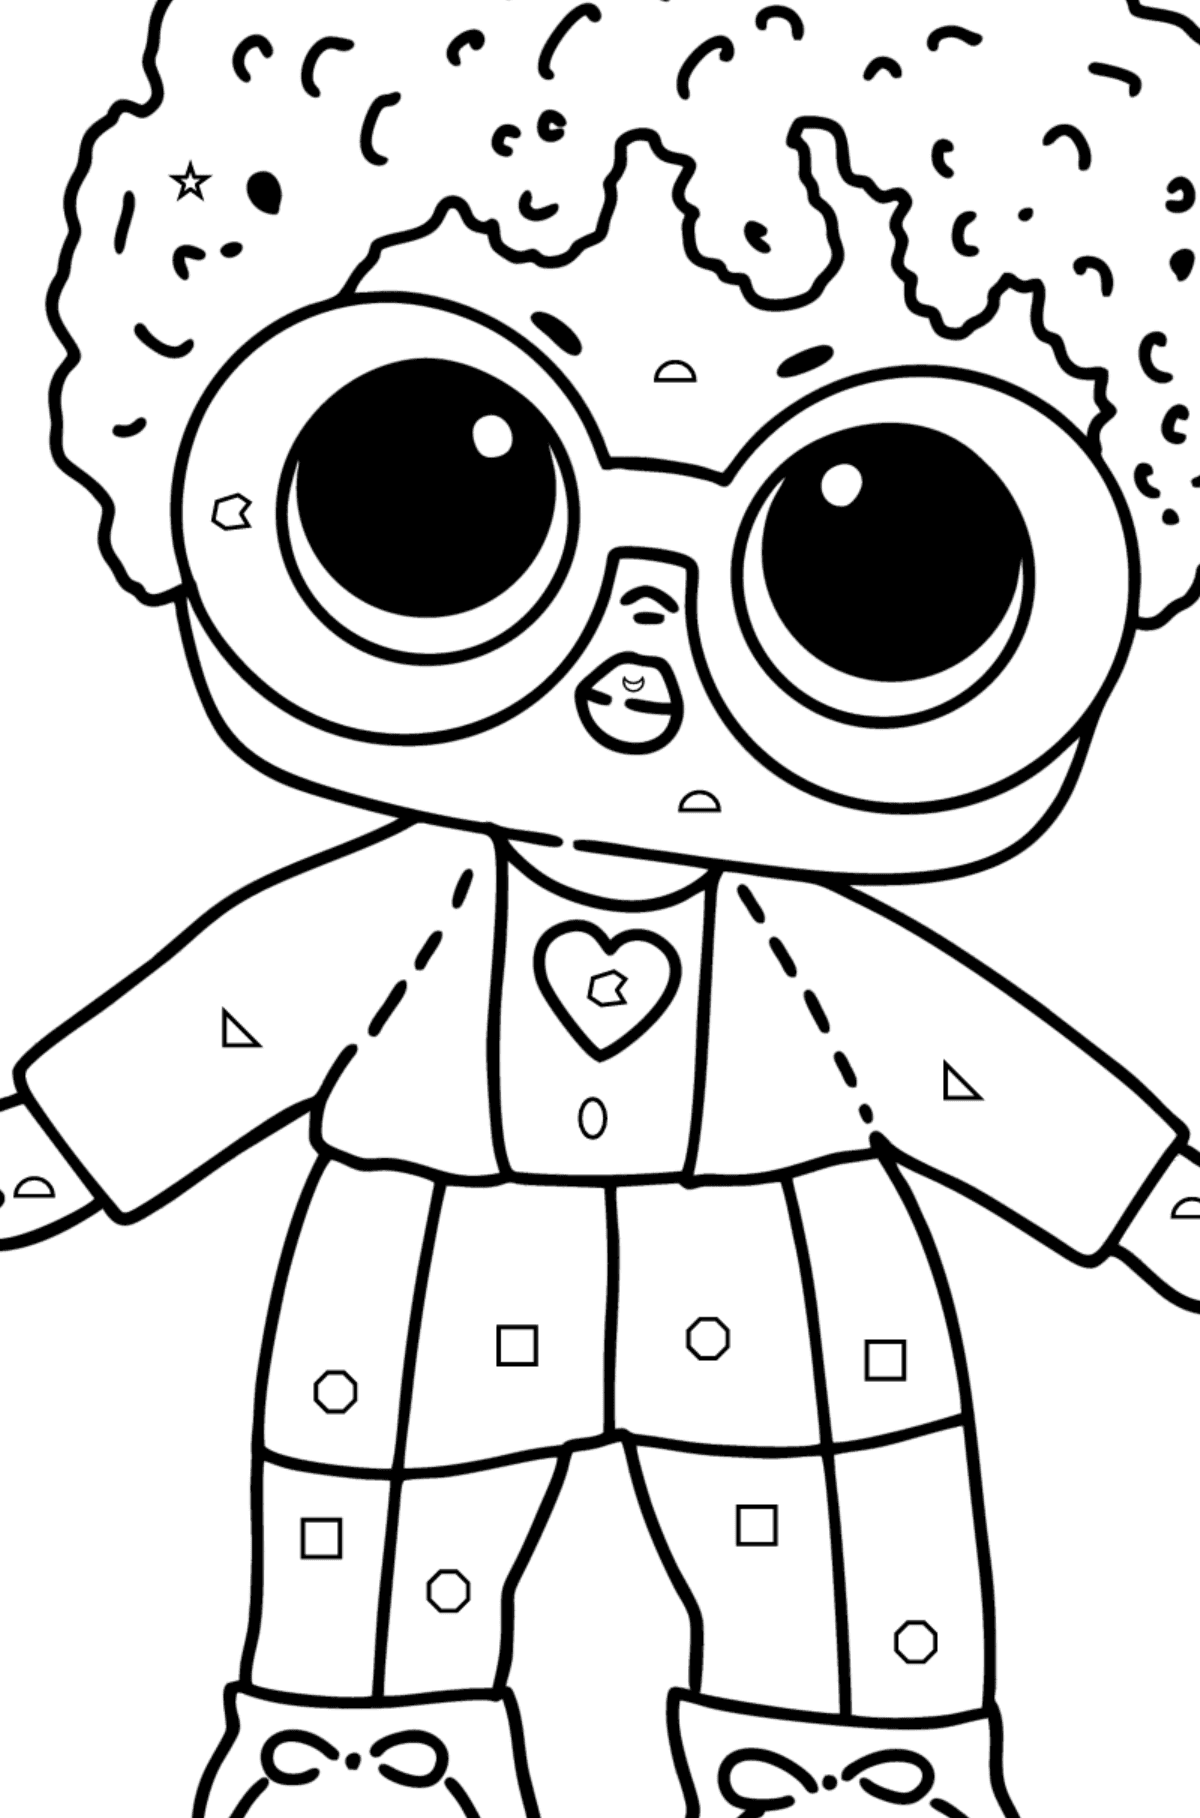 LOL Surprise Boy Steezy coloring page ♥ Online and Print for Free